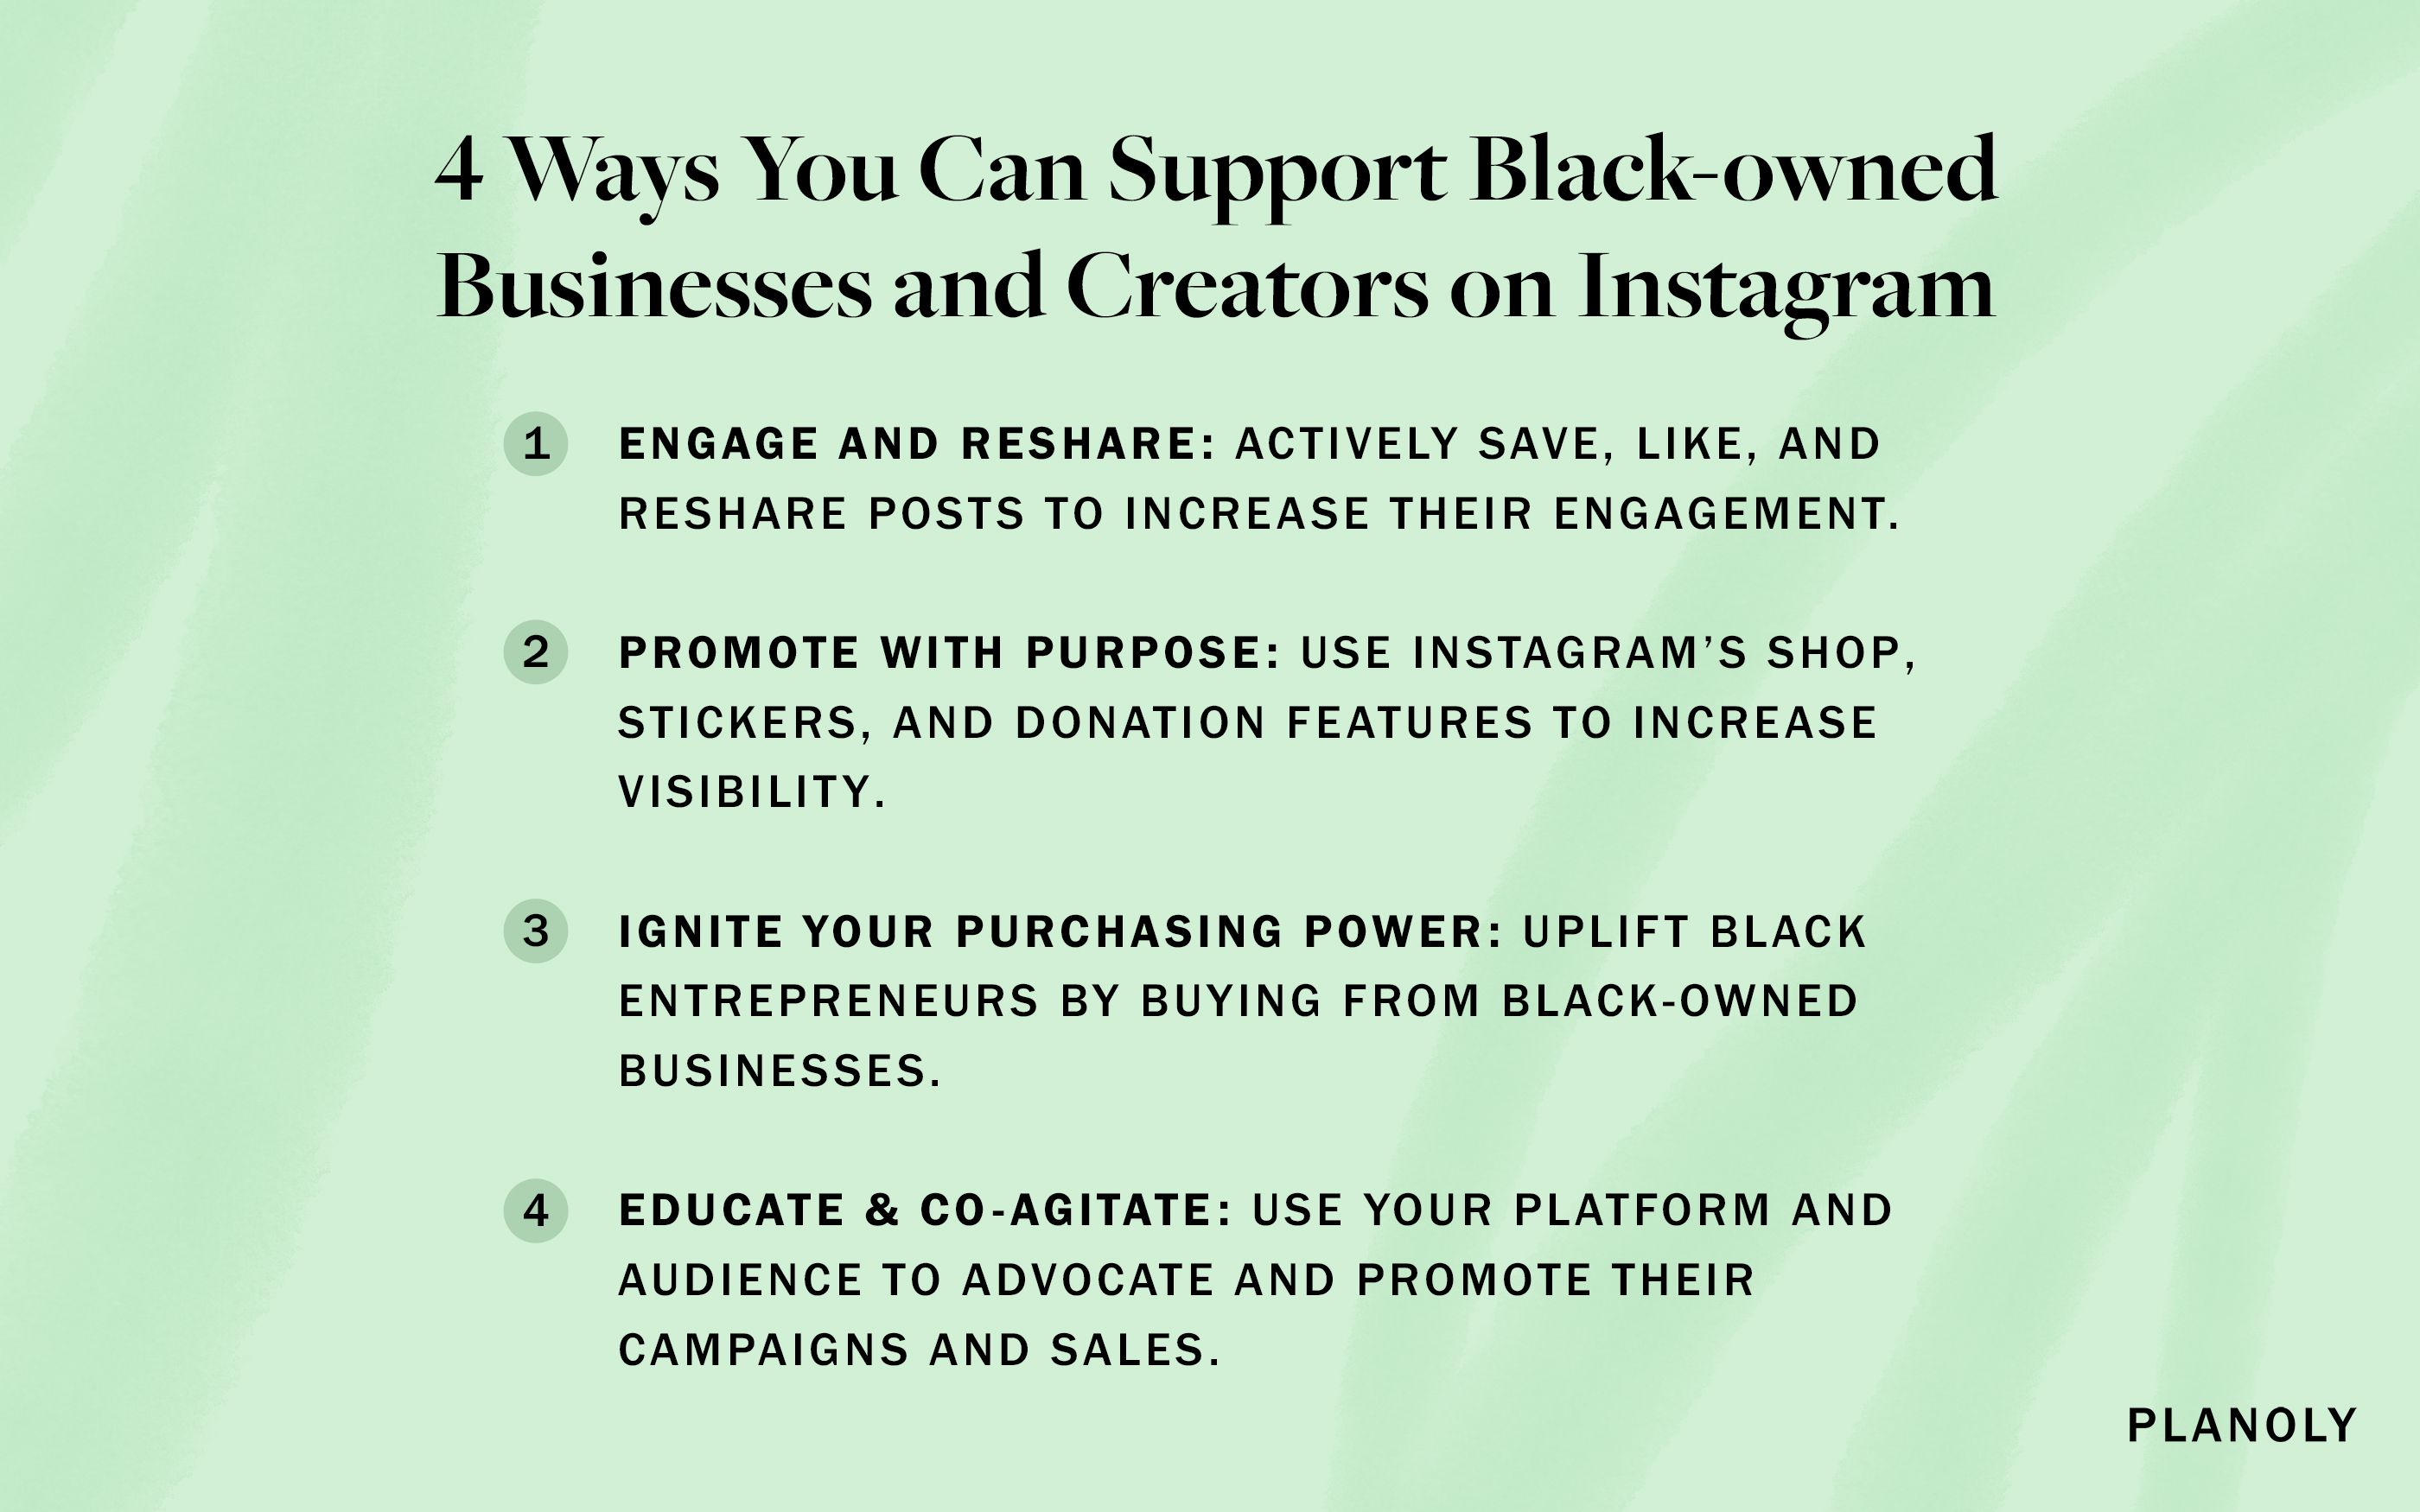 PLANOLY - Blog Post - How to Support Black Businesses - Image 1